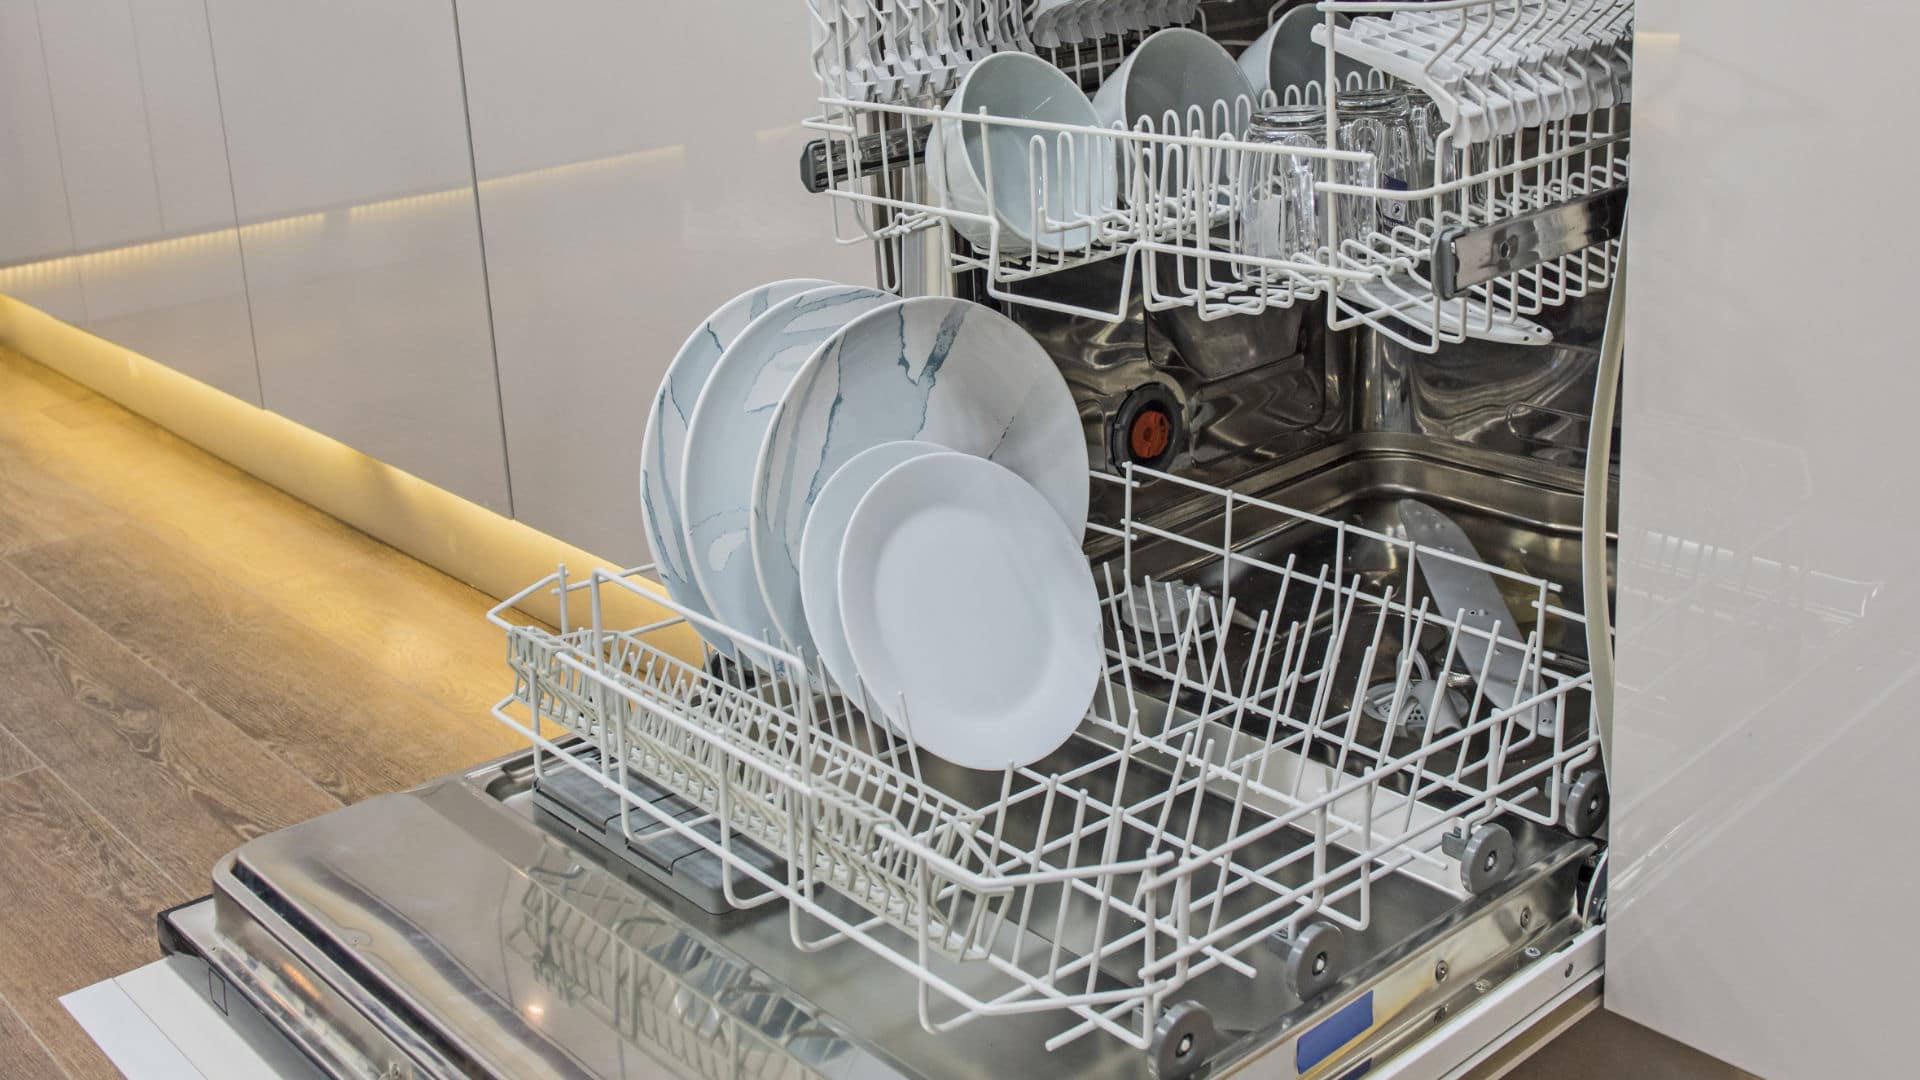 Bosch Dishwasher Not Draining? Here's What to Do - A to Z